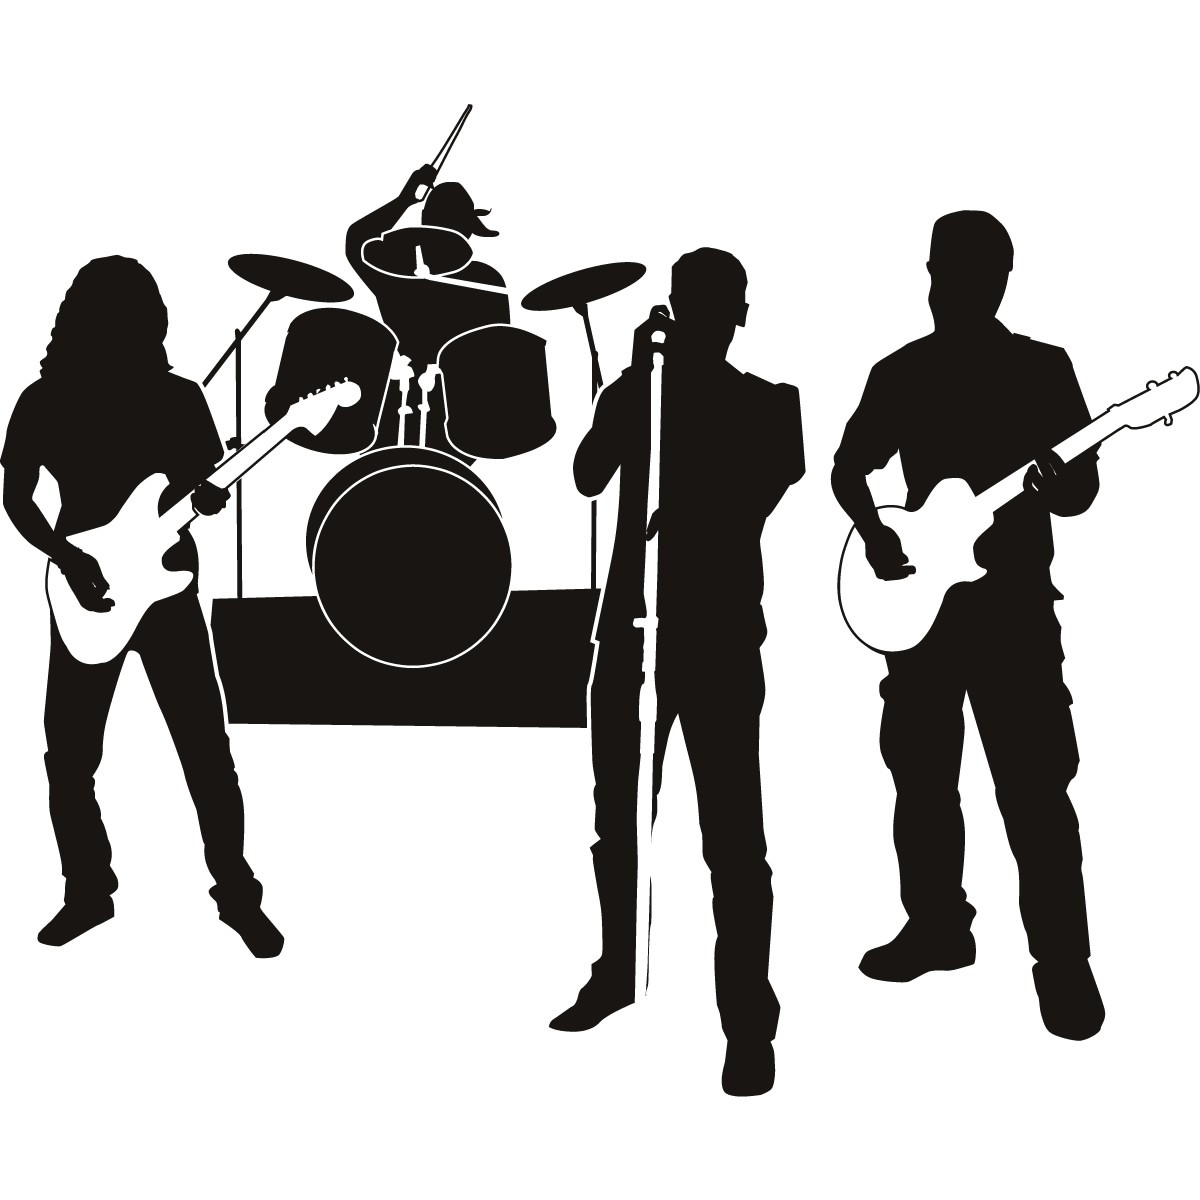 music group clipart - photo #12